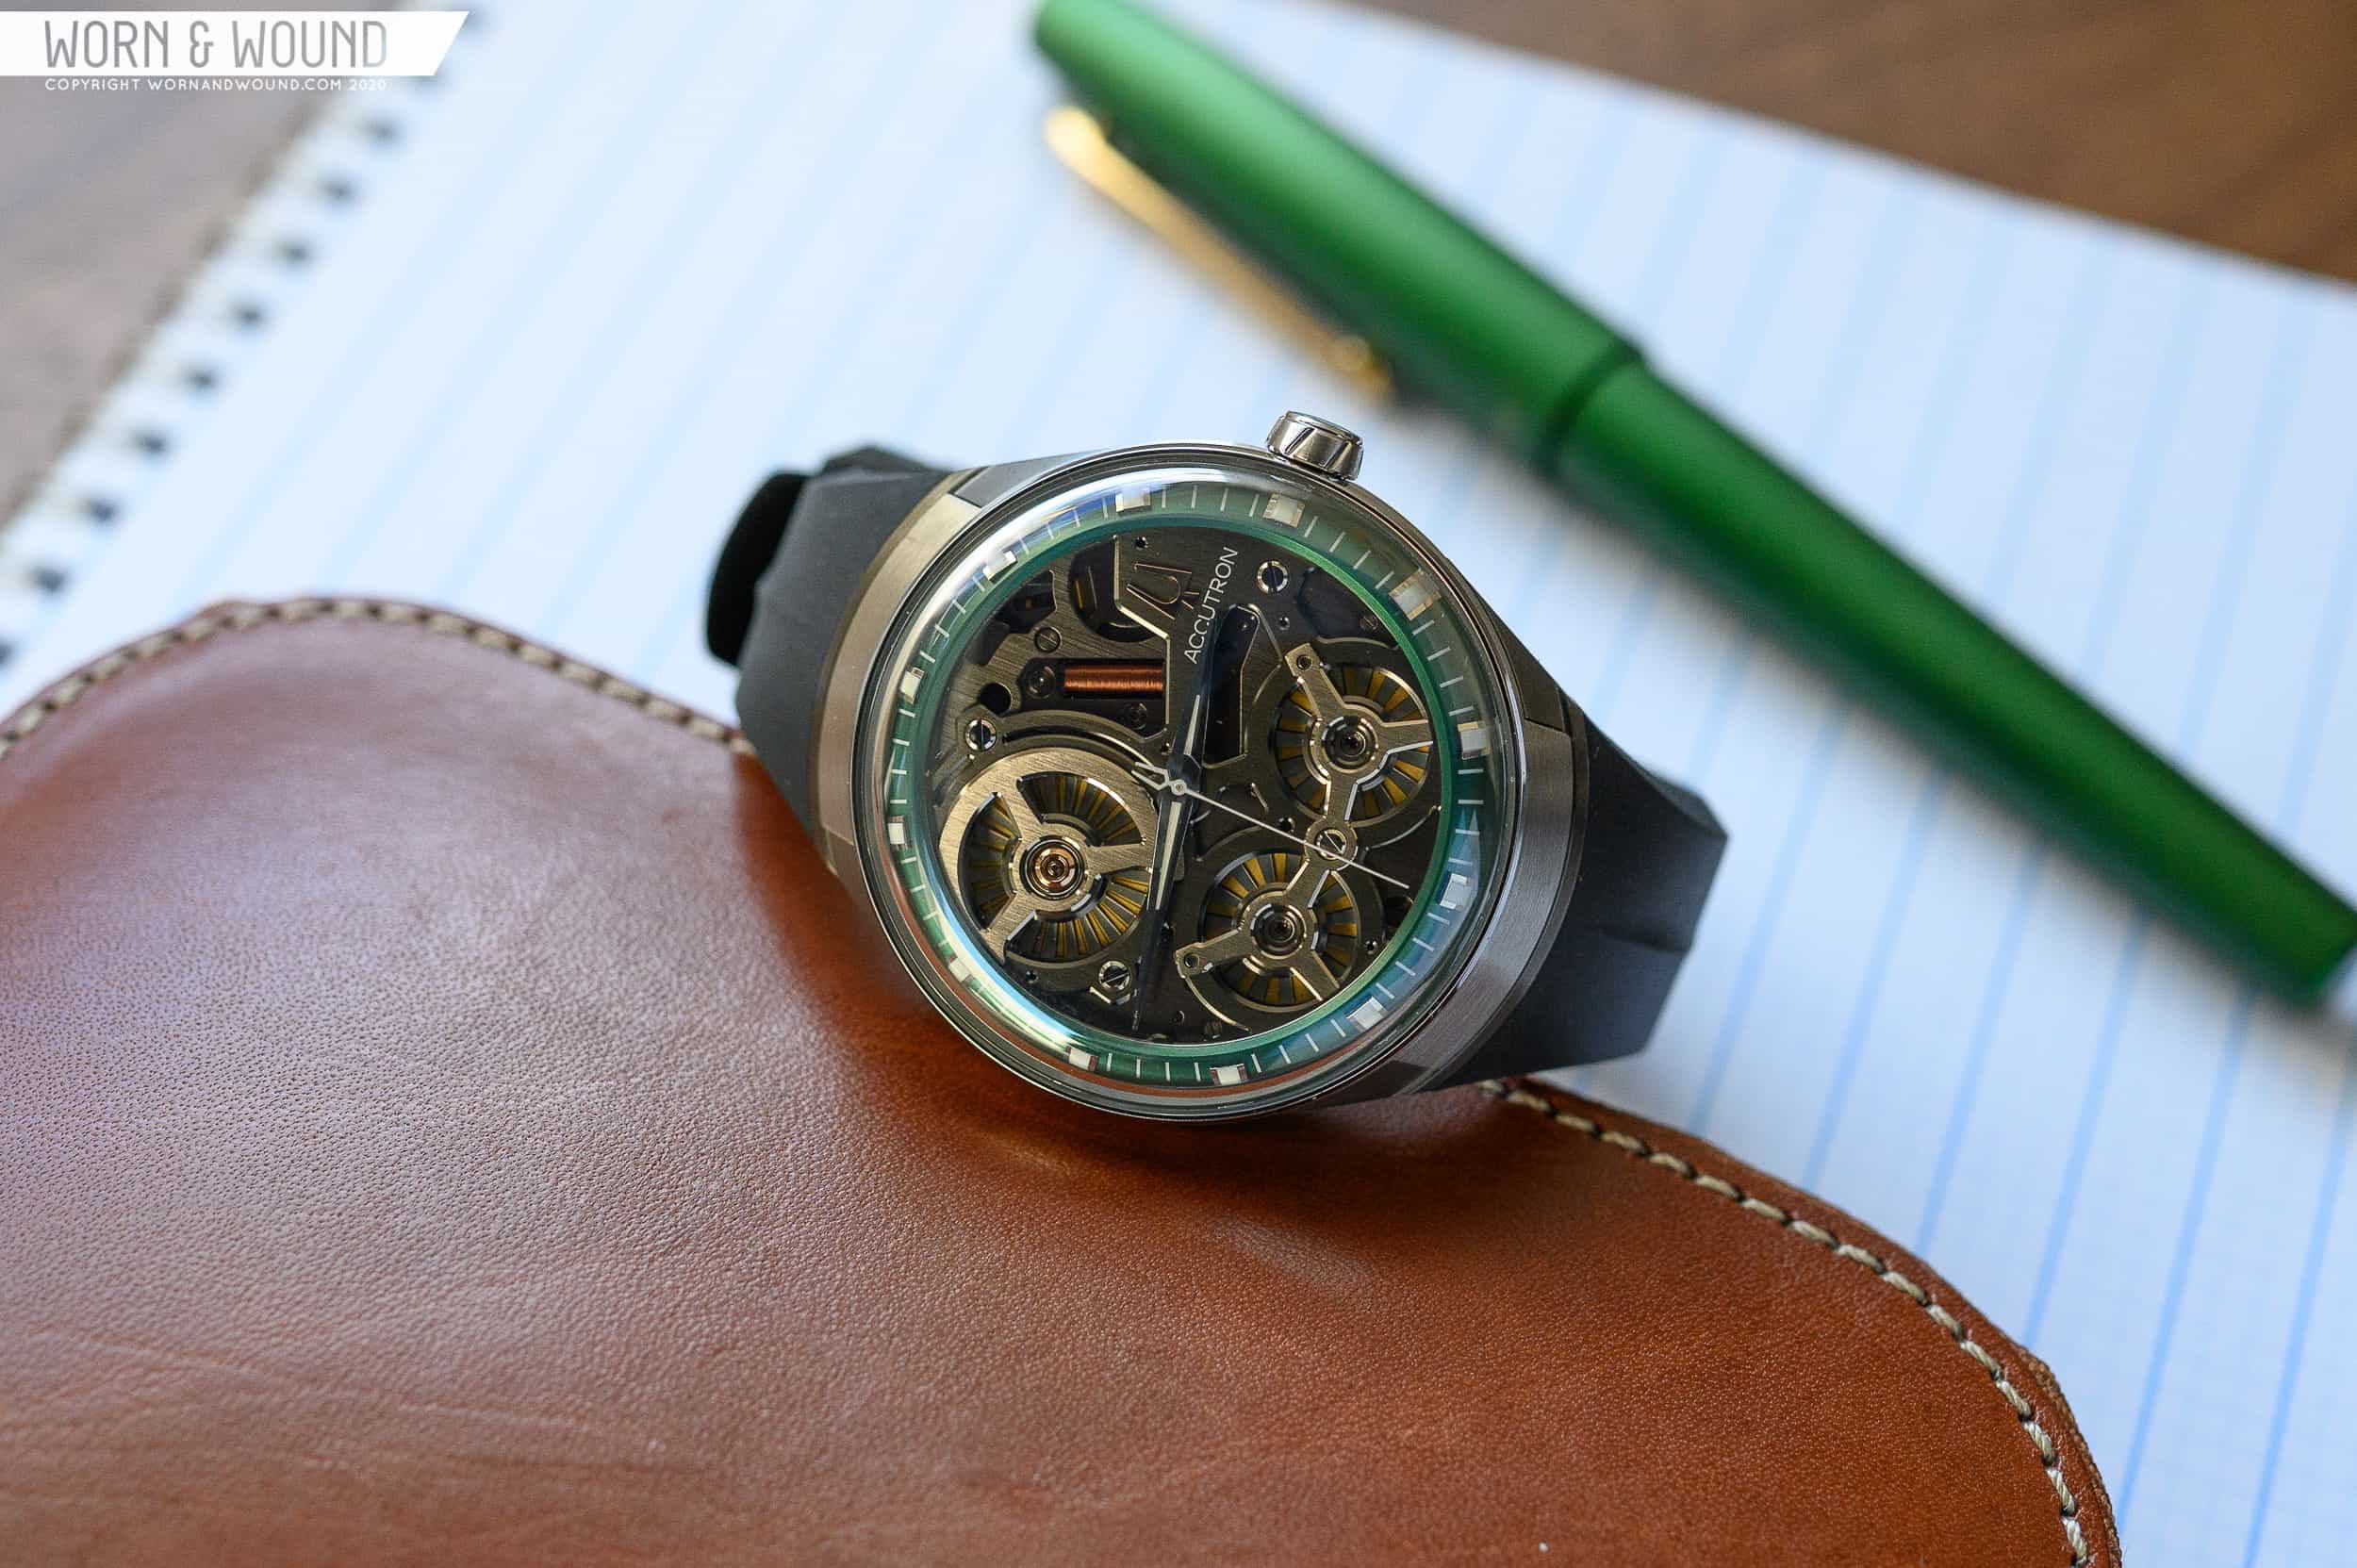 Review: The Accutron DNA - Worn & Wound